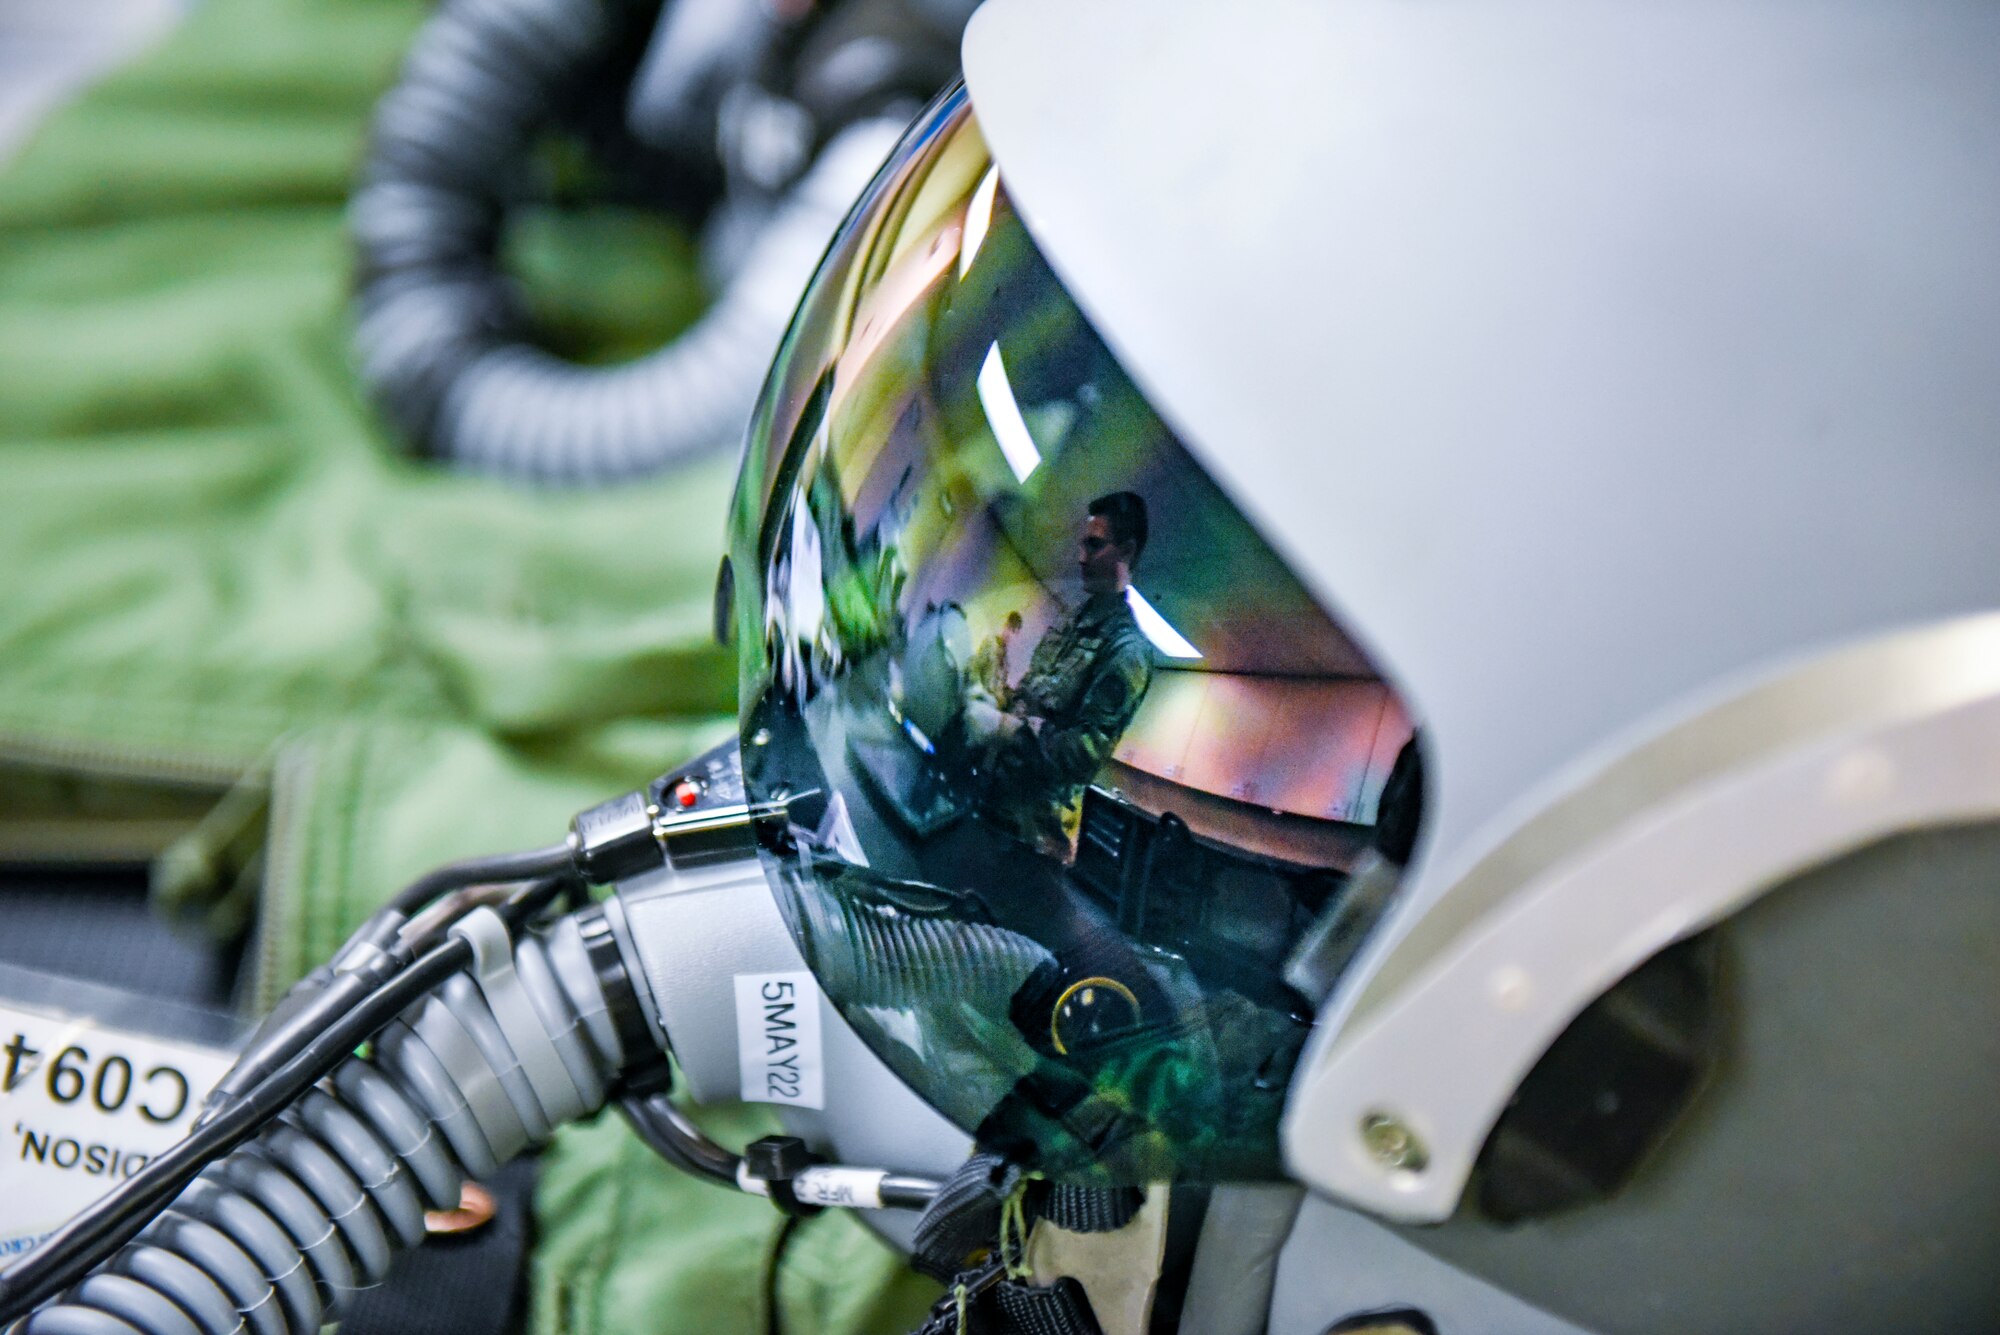 U.S. Air Force Airman 1st Class Payton Arbach, 92nd Operation Support Squadron Aircrew Flight Equipment apprentice, finishes putting a pilot’s helmet together at Fairchild Air Force Base, Washington, May 3, 2022. AFE’s job is to maintain the practicality and safety of equipment to prevent the rare occurrence of defective gear. (U.S. Air Force photo by Airman 1st Class Haiden Morris)